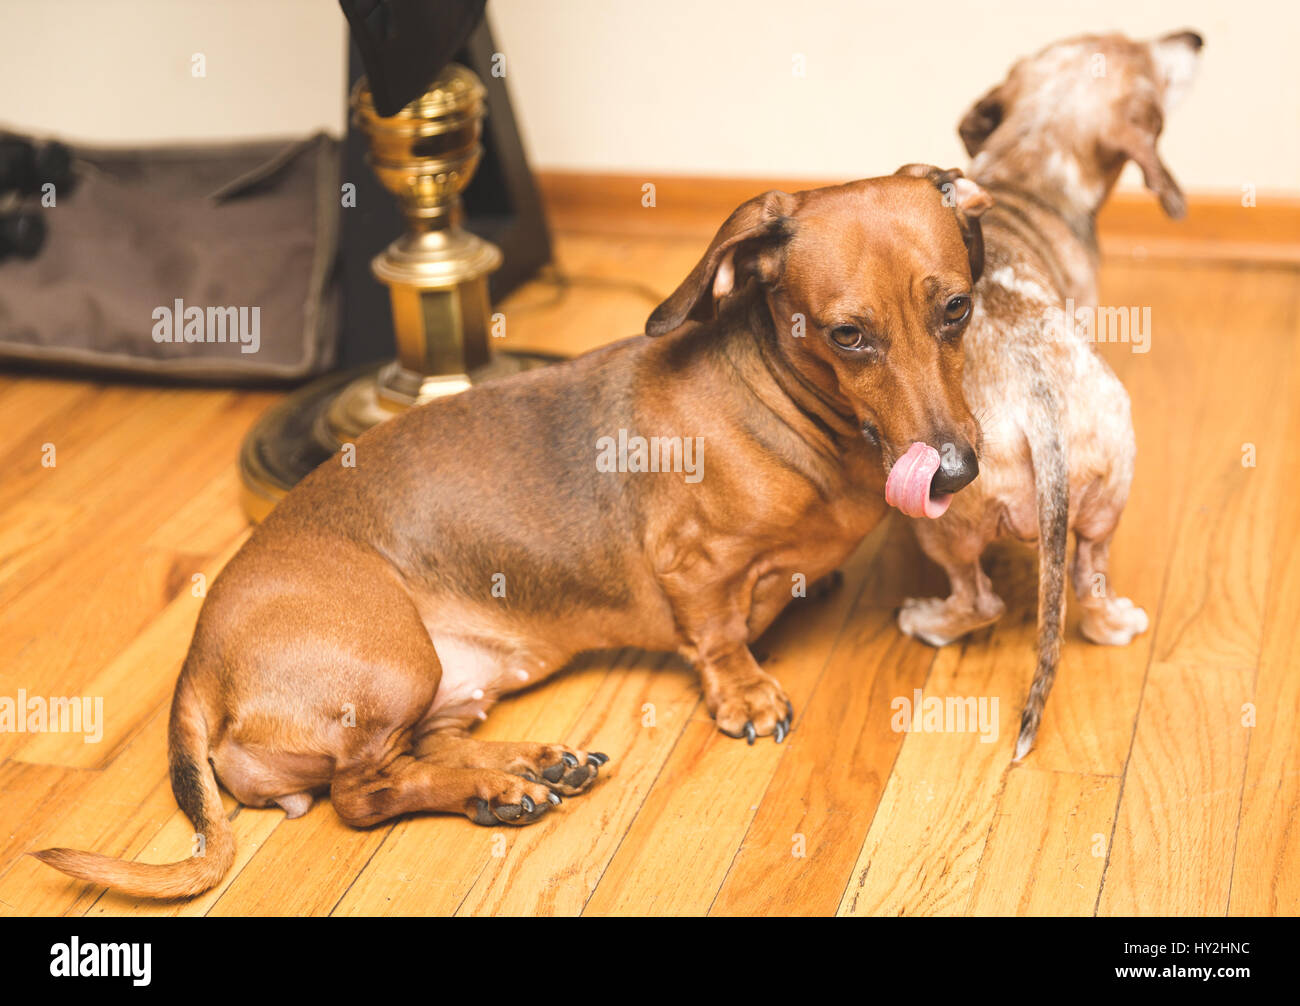 Two dachsunds sitting on wood floor in modern home. One dog is looking at the camera; the other dog is sitting down and looking away. Stock Photo